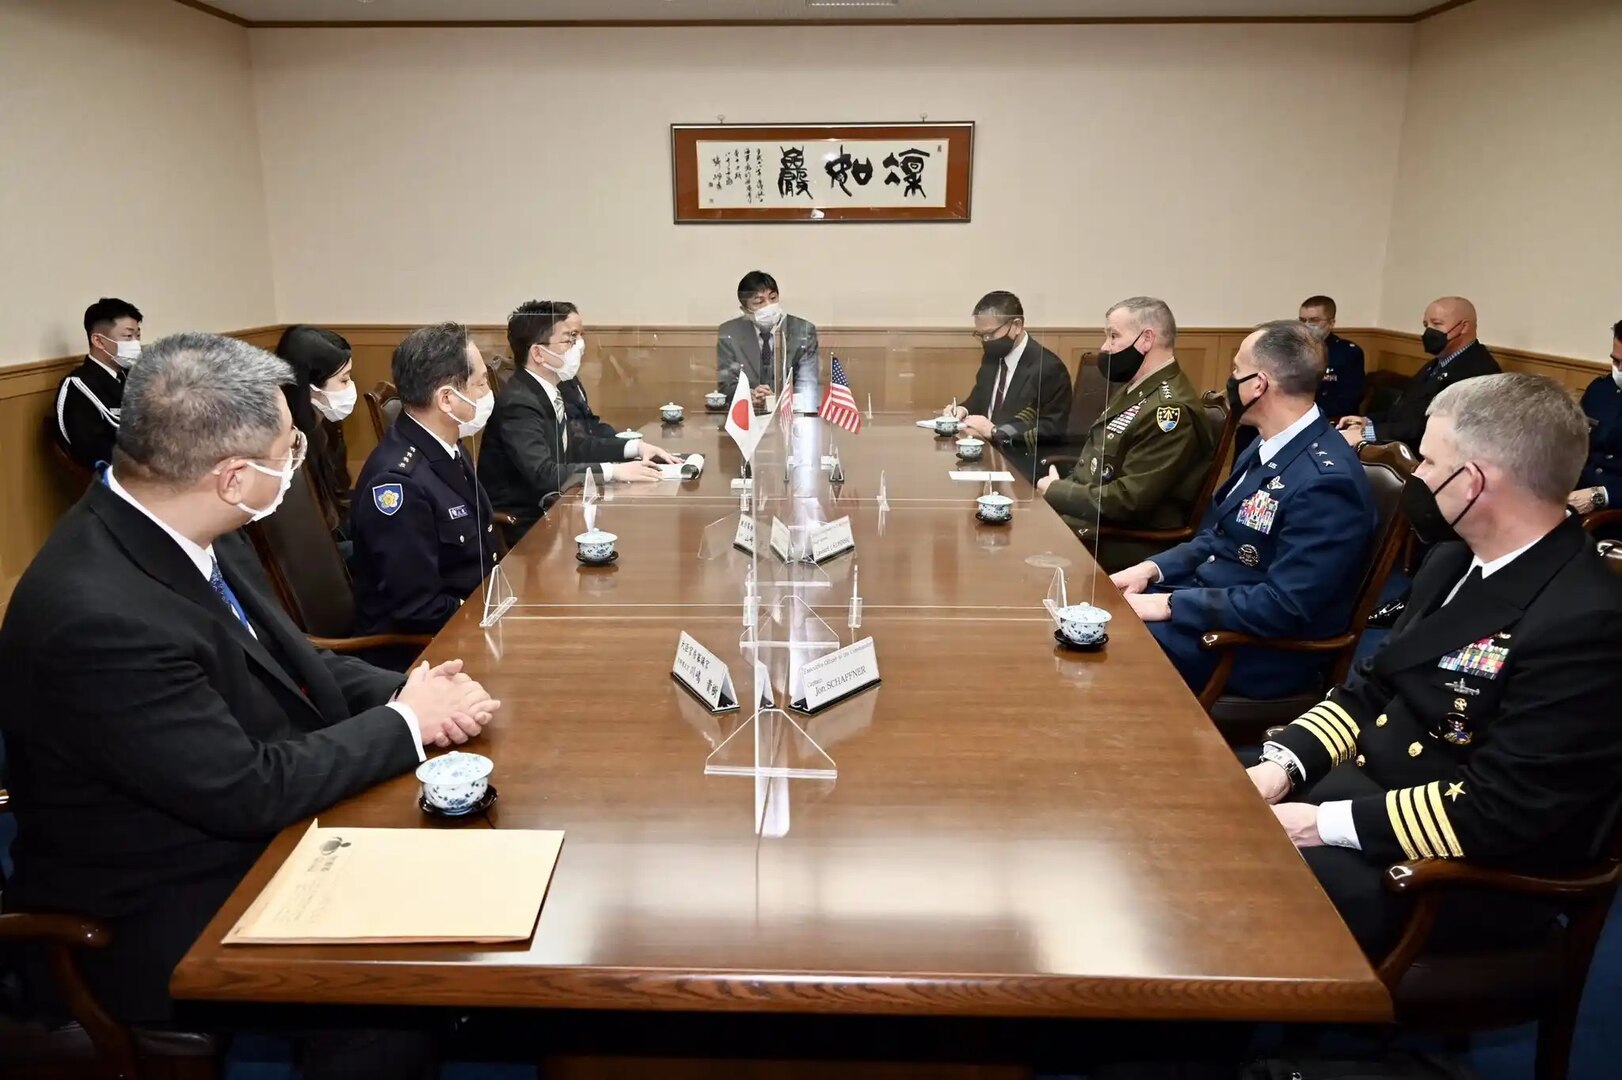 U.S. Space Command commander, U.S. Army Gen. James Dickinson, visited Japan March 17-18, 2022.